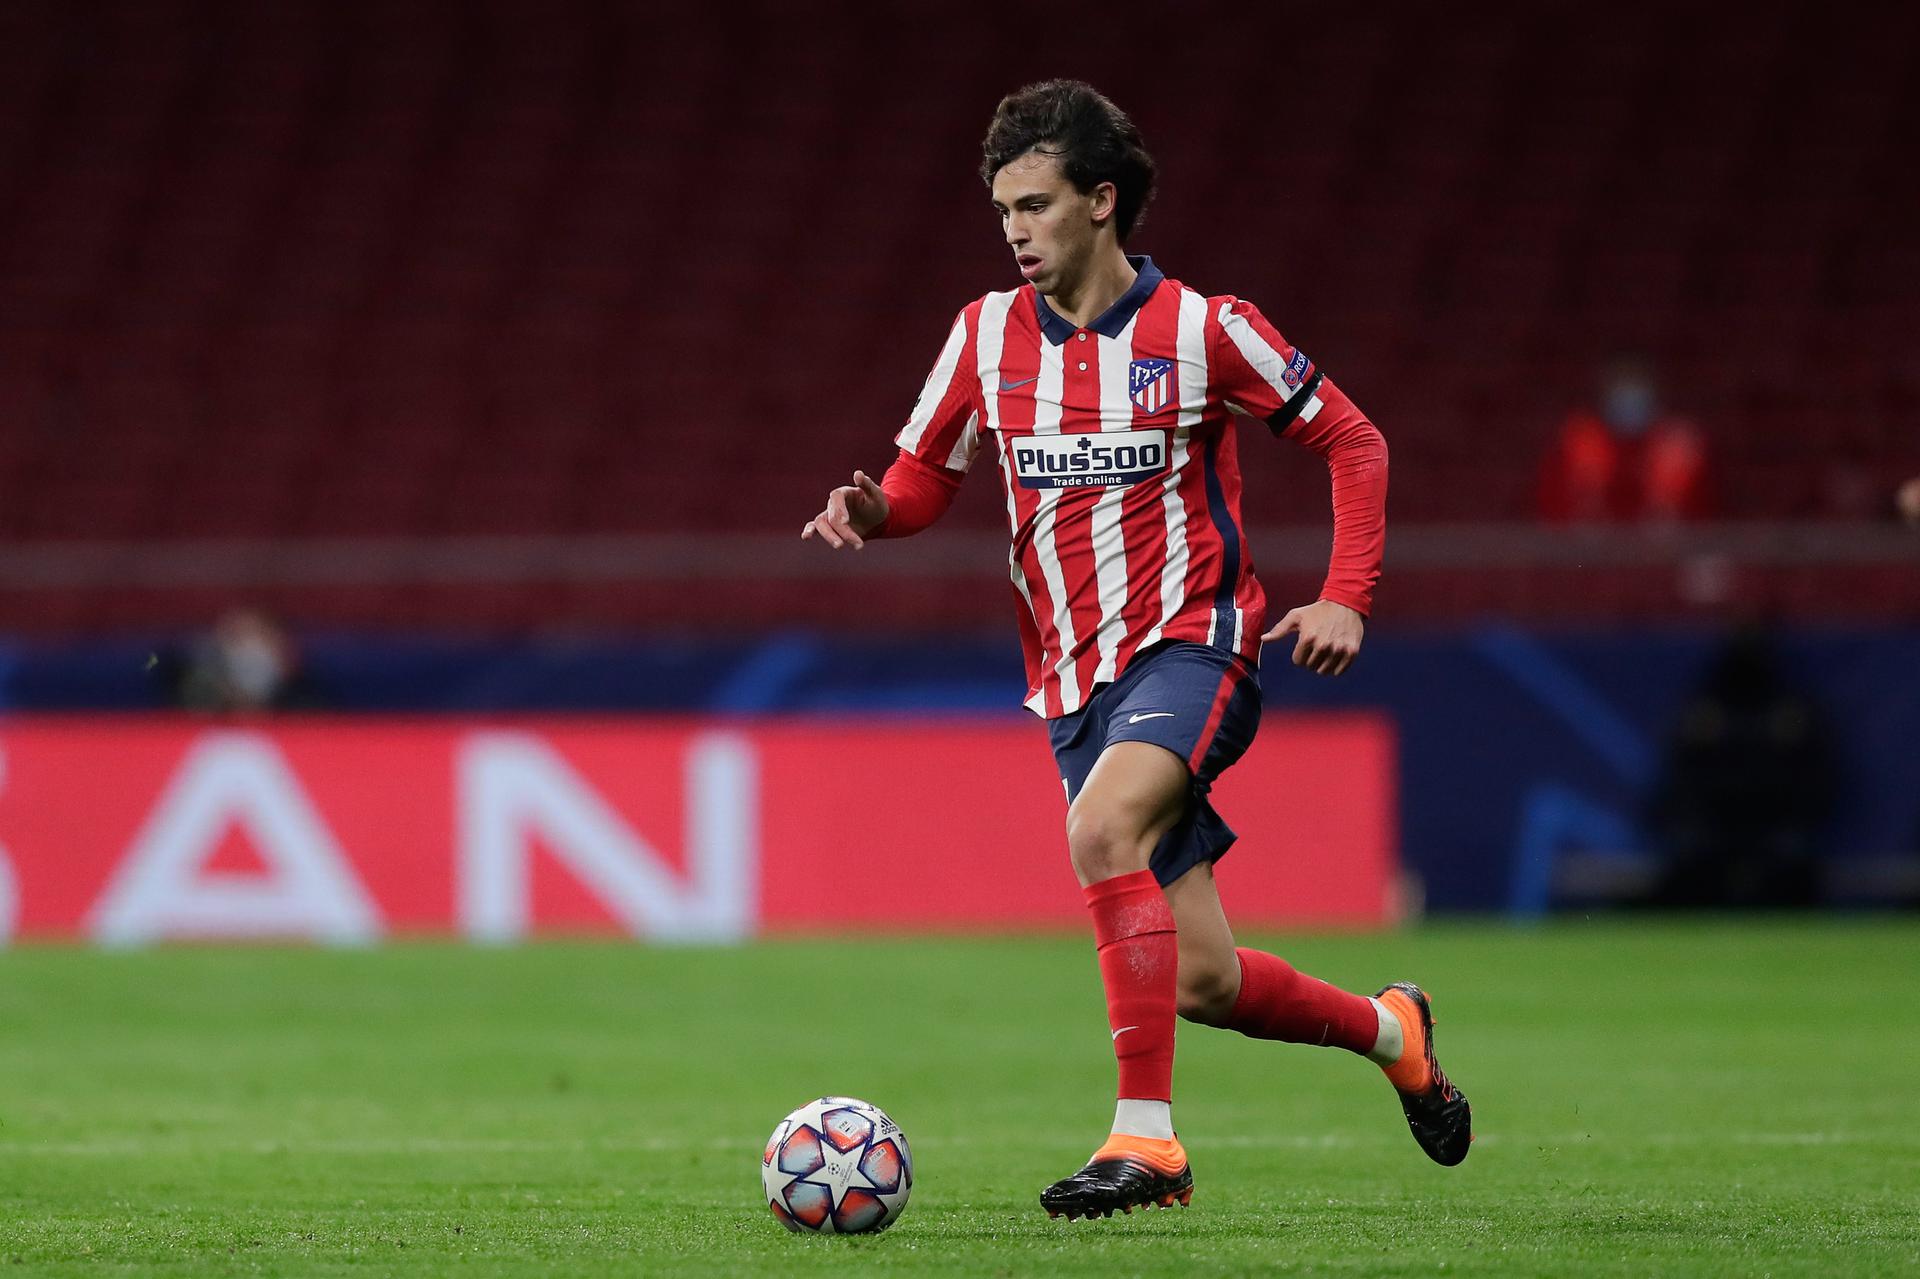 MADRID, SPAIN - DECEMBER 01: Joao Felix of Atletico de Madrid controls the ball during the UEFA Champions League Group A stage match between Atletico Madrid and FC Bayern Muenchen at Estadio Wanda Metropolitano on December 01, 2020 in Madrid, Spain. (Photo by Gonzalo Arroyo Moreno/Getty Images)